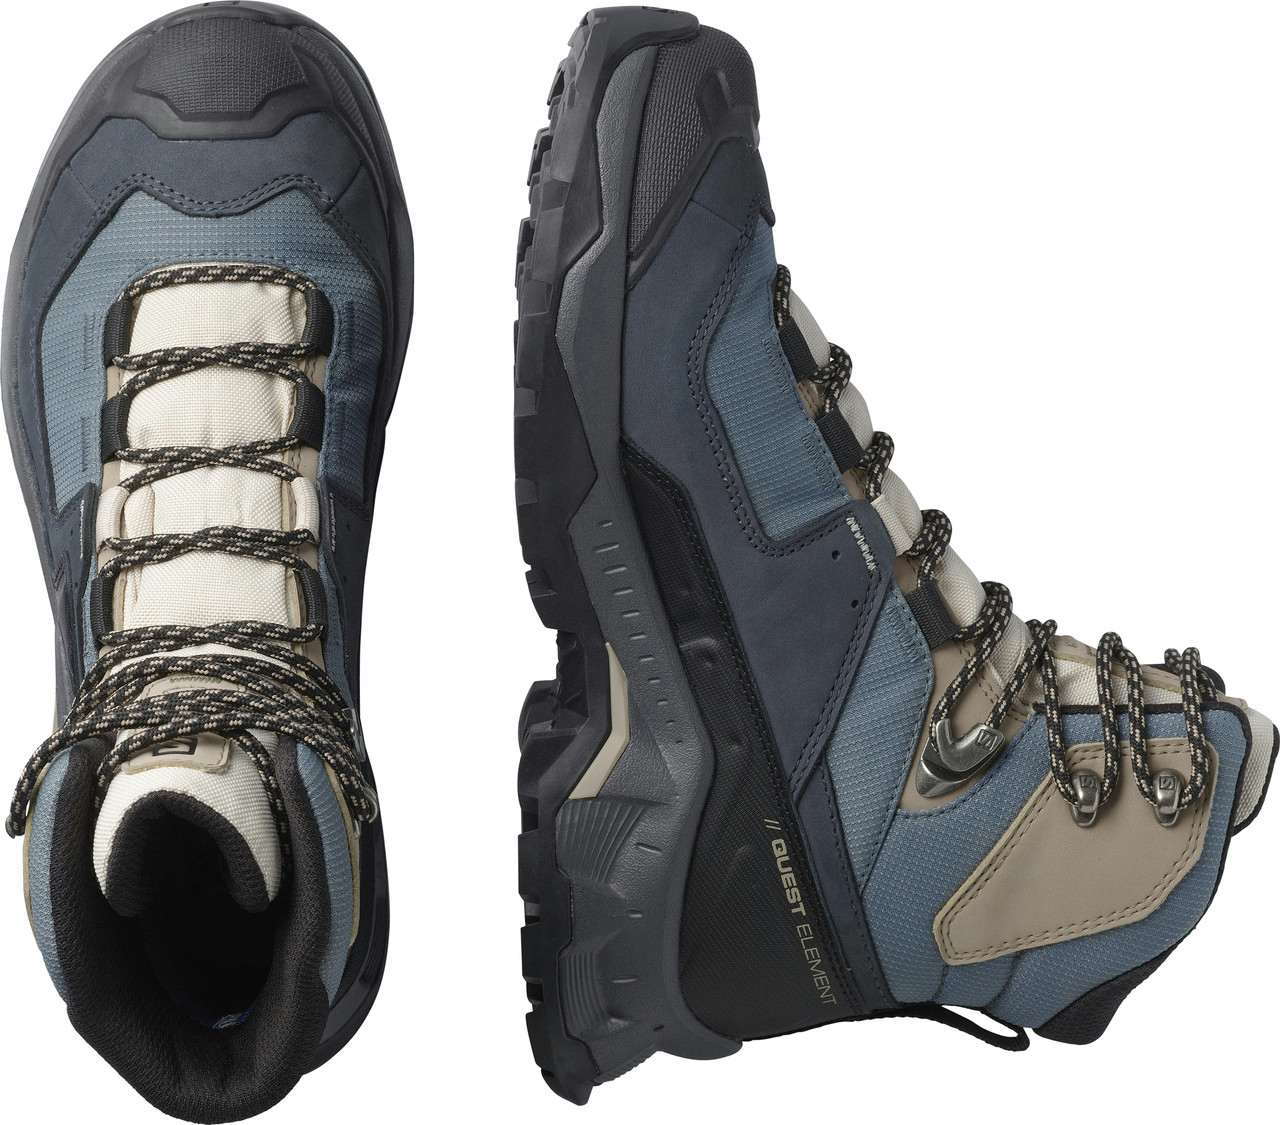 Quest Element Gore-Tex Hiking Boots Ebony/Rainy Day/Stormy We